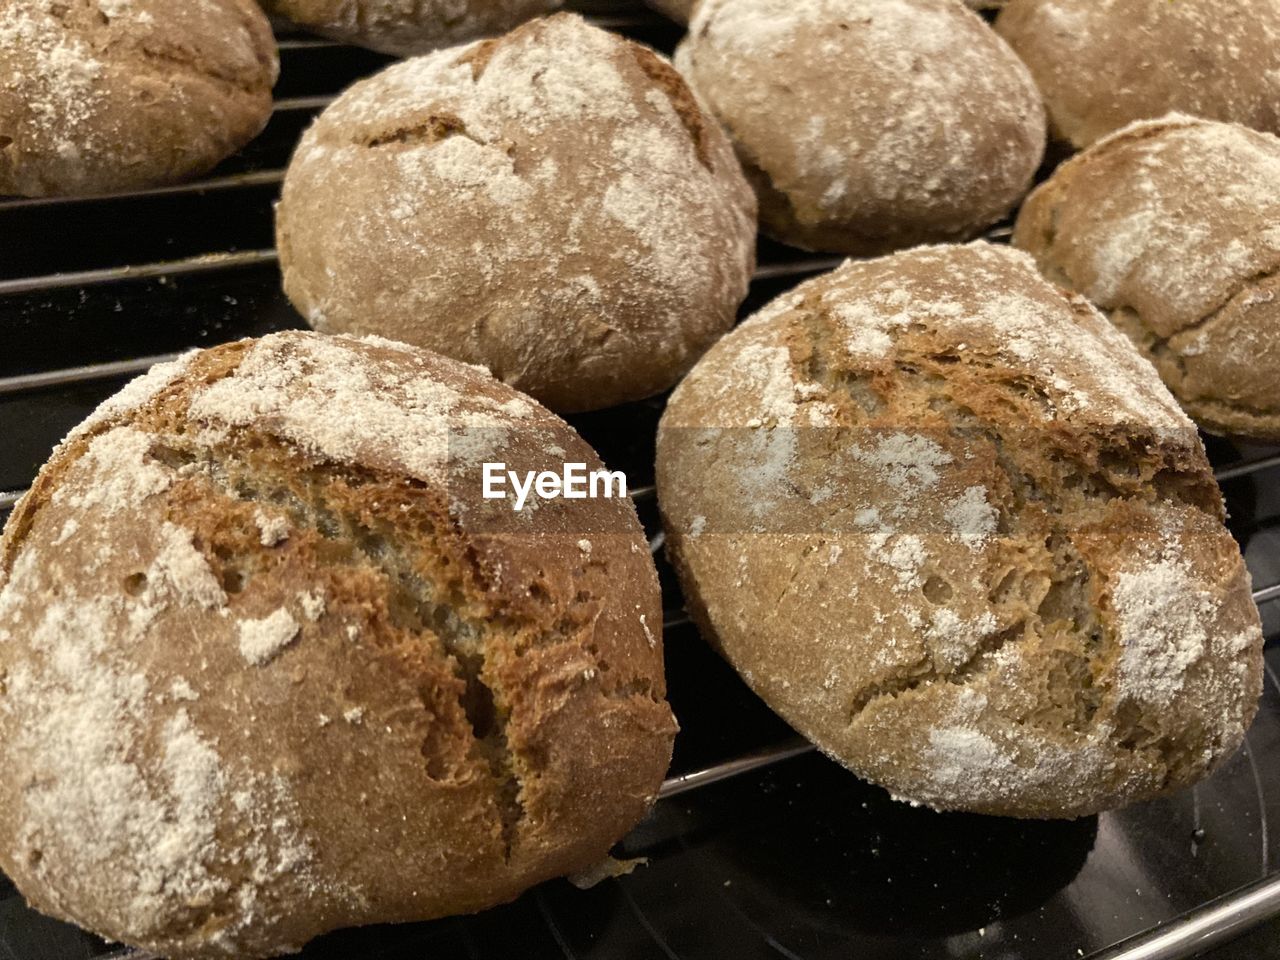 food, food and drink, rye bread, freshness, bread, sourdough, baked, whole grain, brown bread, loaf of bread, no people, wellbeing, close-up, healthy eating, store, ciabatta, still life, bakery, indoors, brown, fast food, soda bread, appliance, baking bread, high angle view, dessert